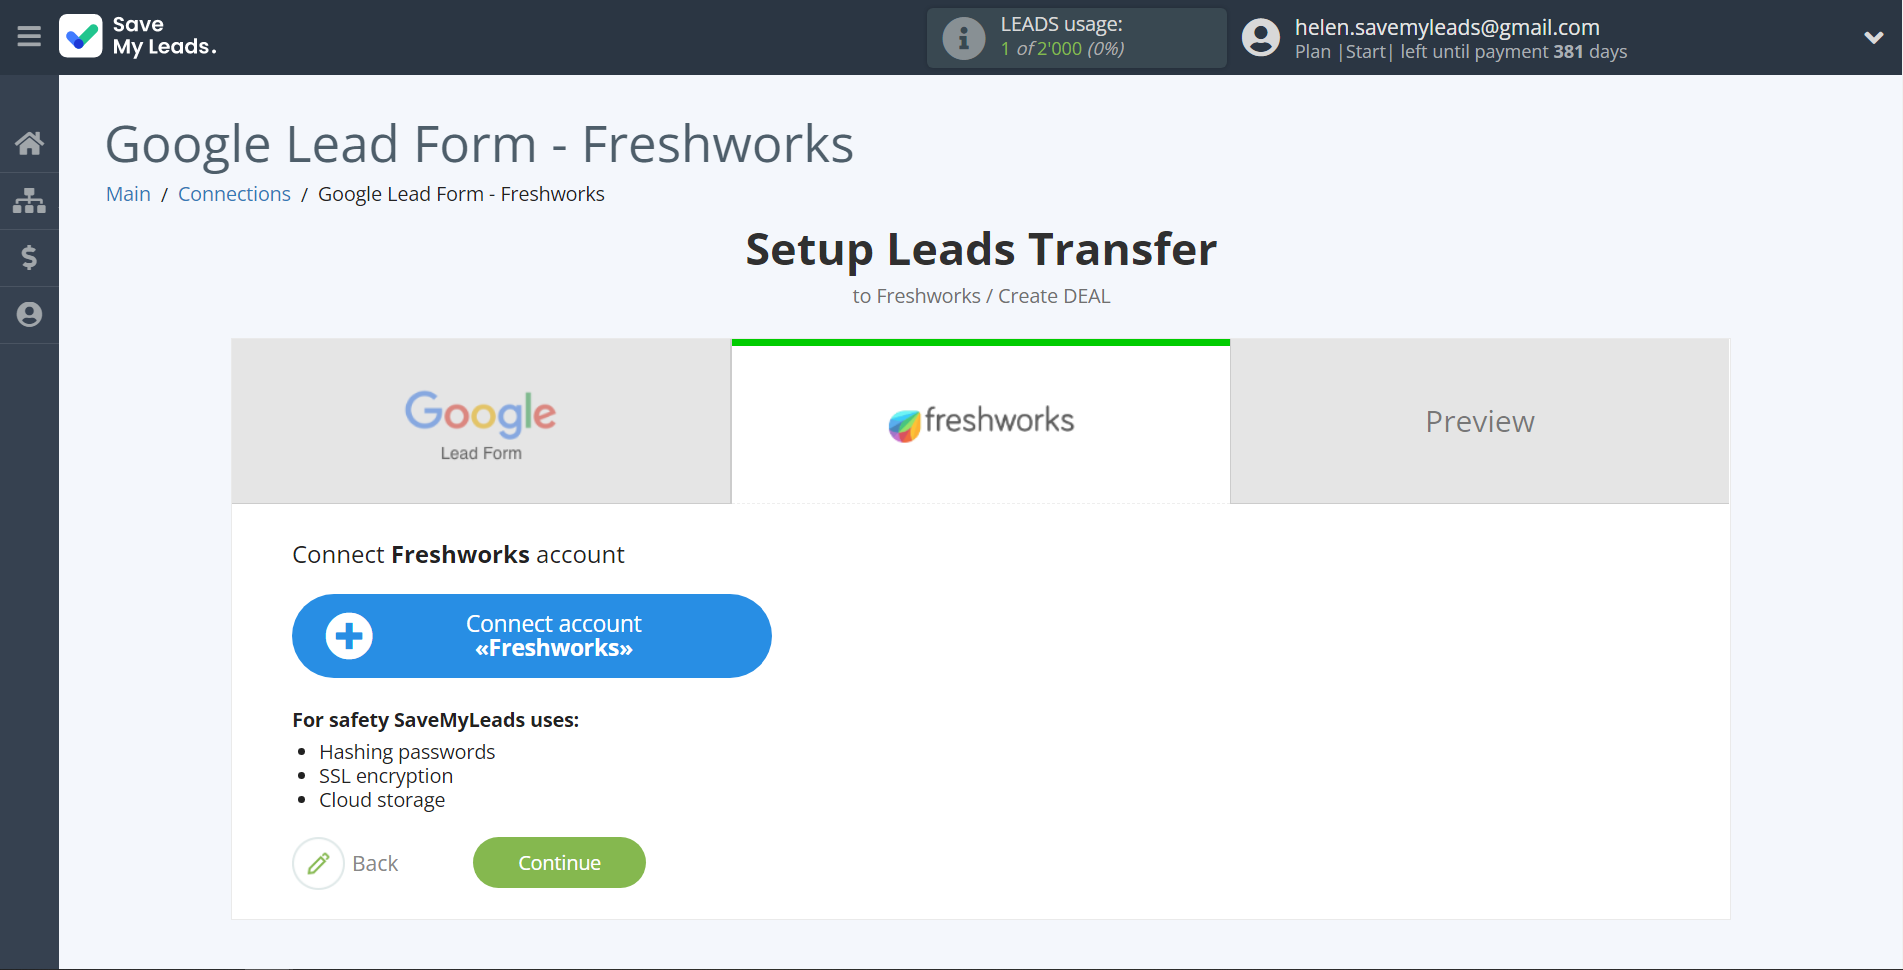 How to Connect Google Lead Form with Freshworks Create Deal | Data Destination account connection